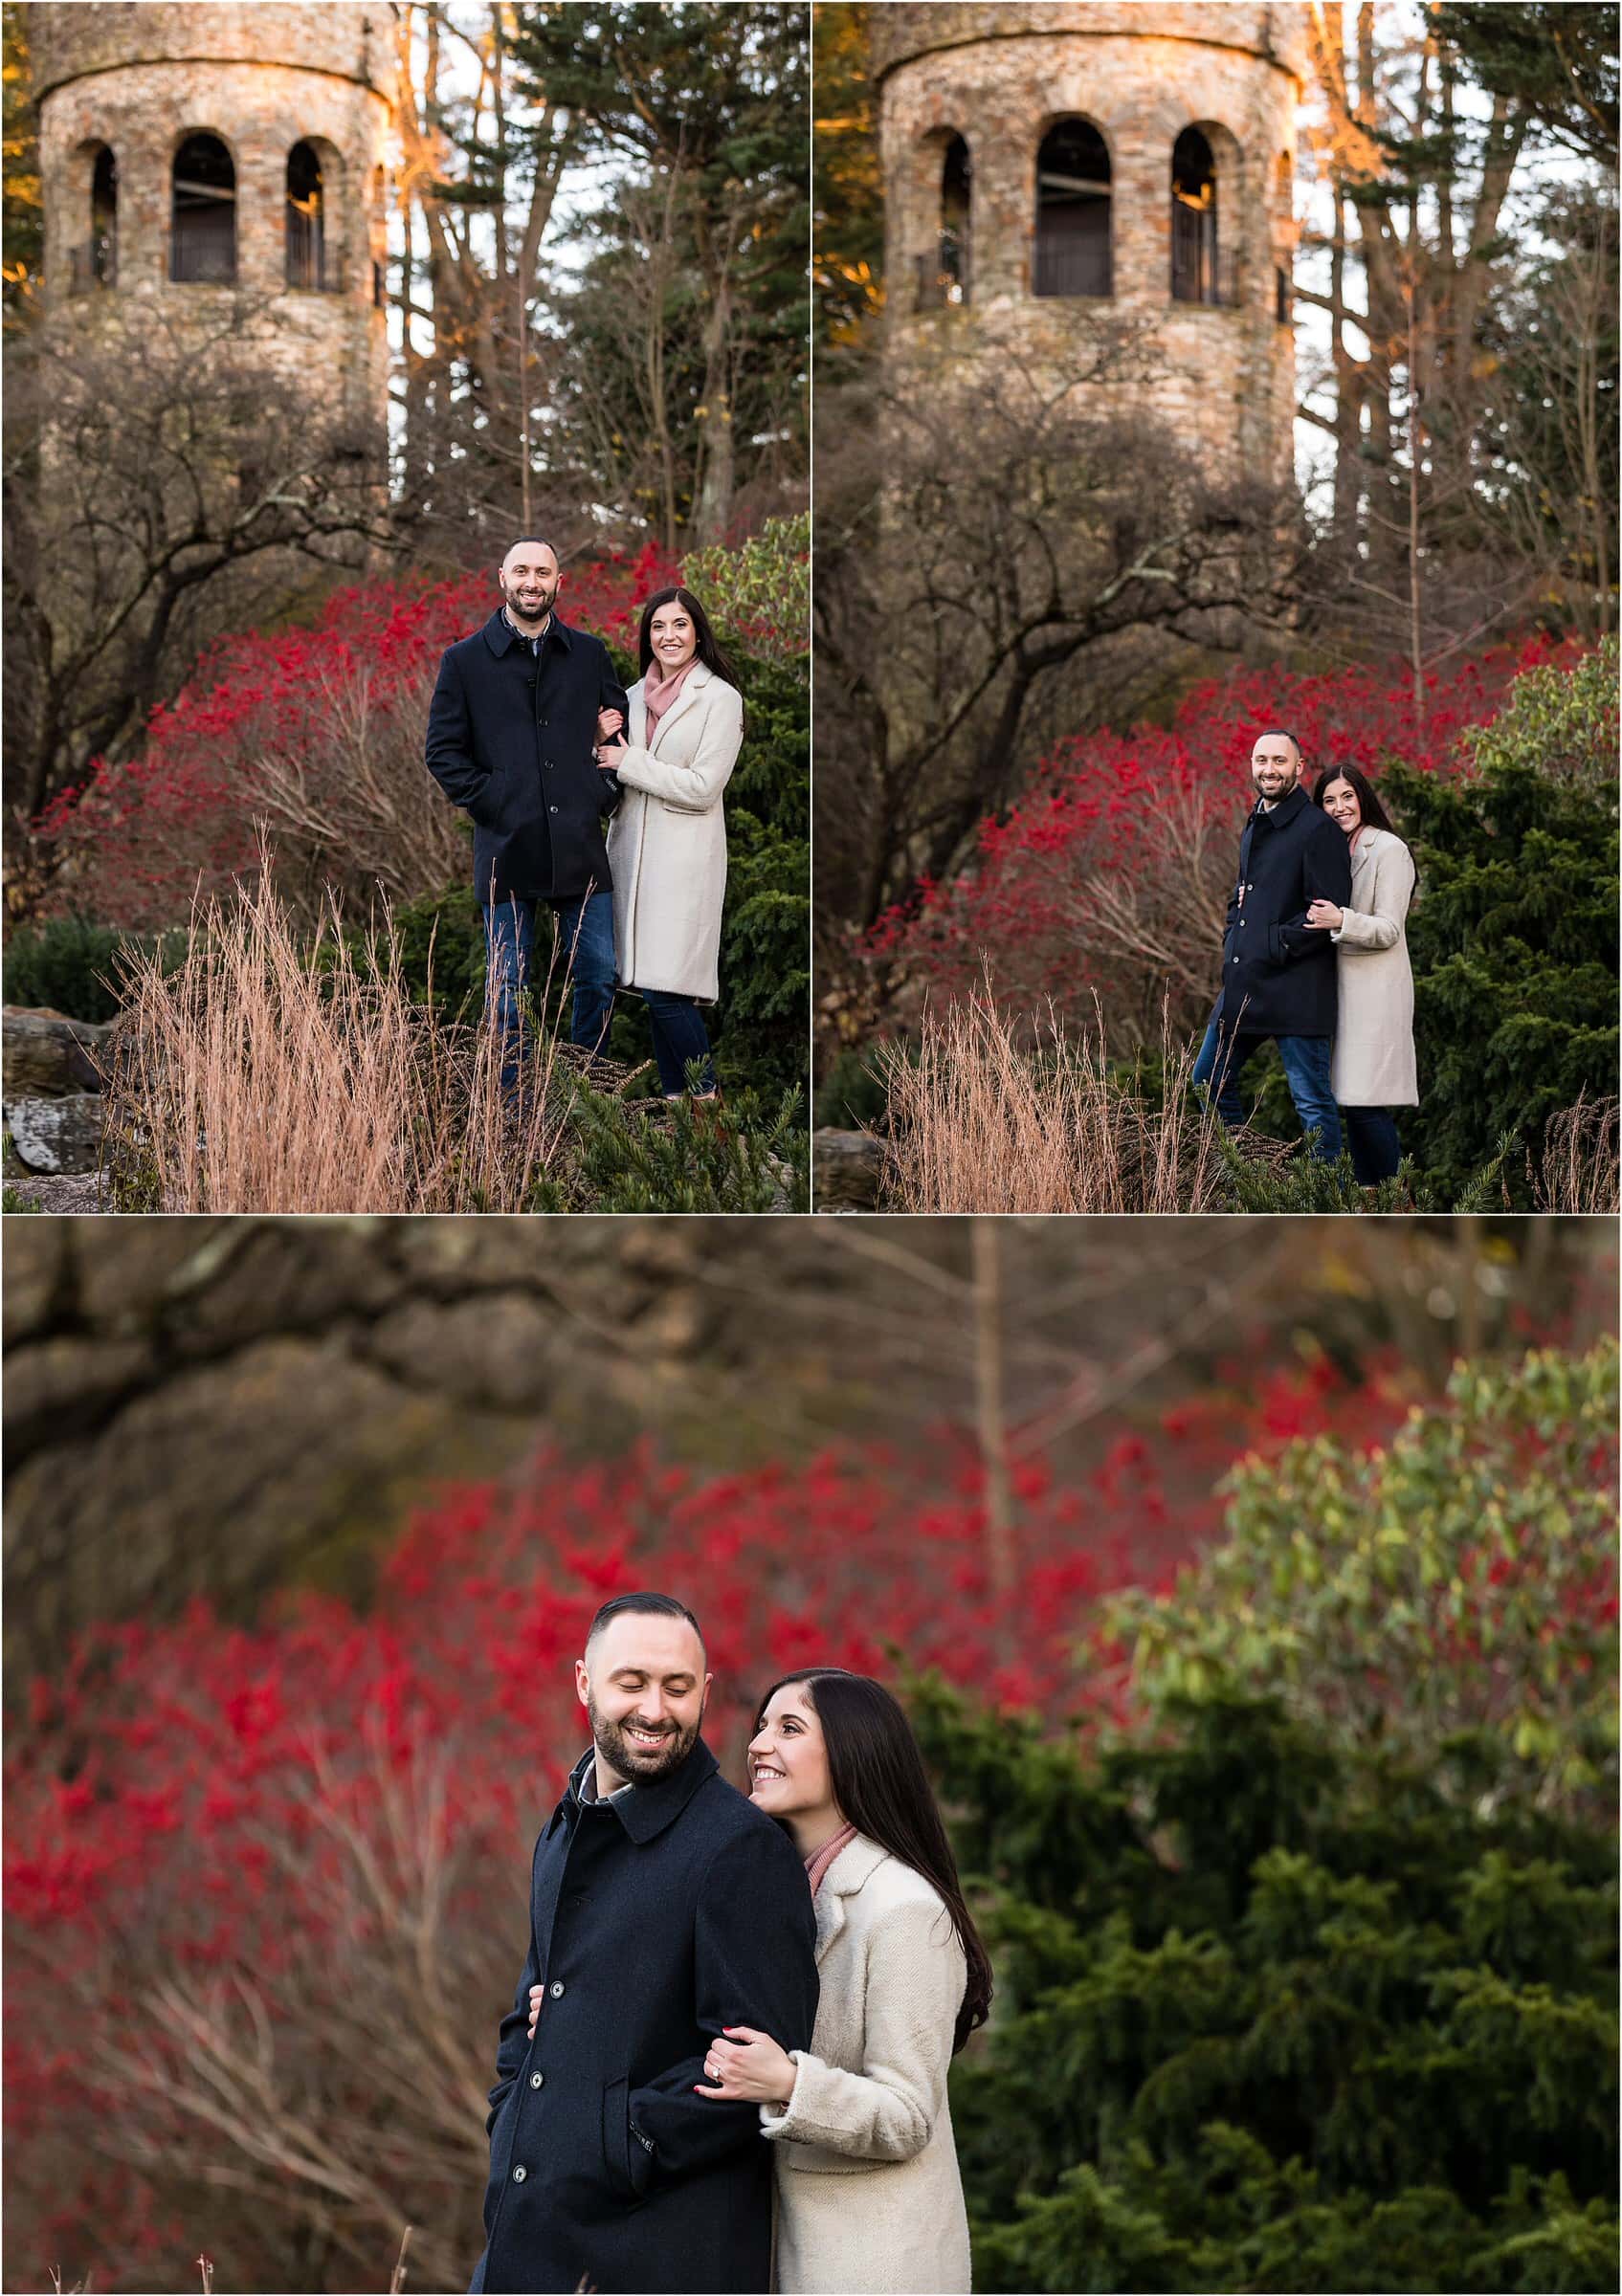 Longwood Gardens holiday engagement session portrait collage of couple standing in front of tall tower and red and green bushes